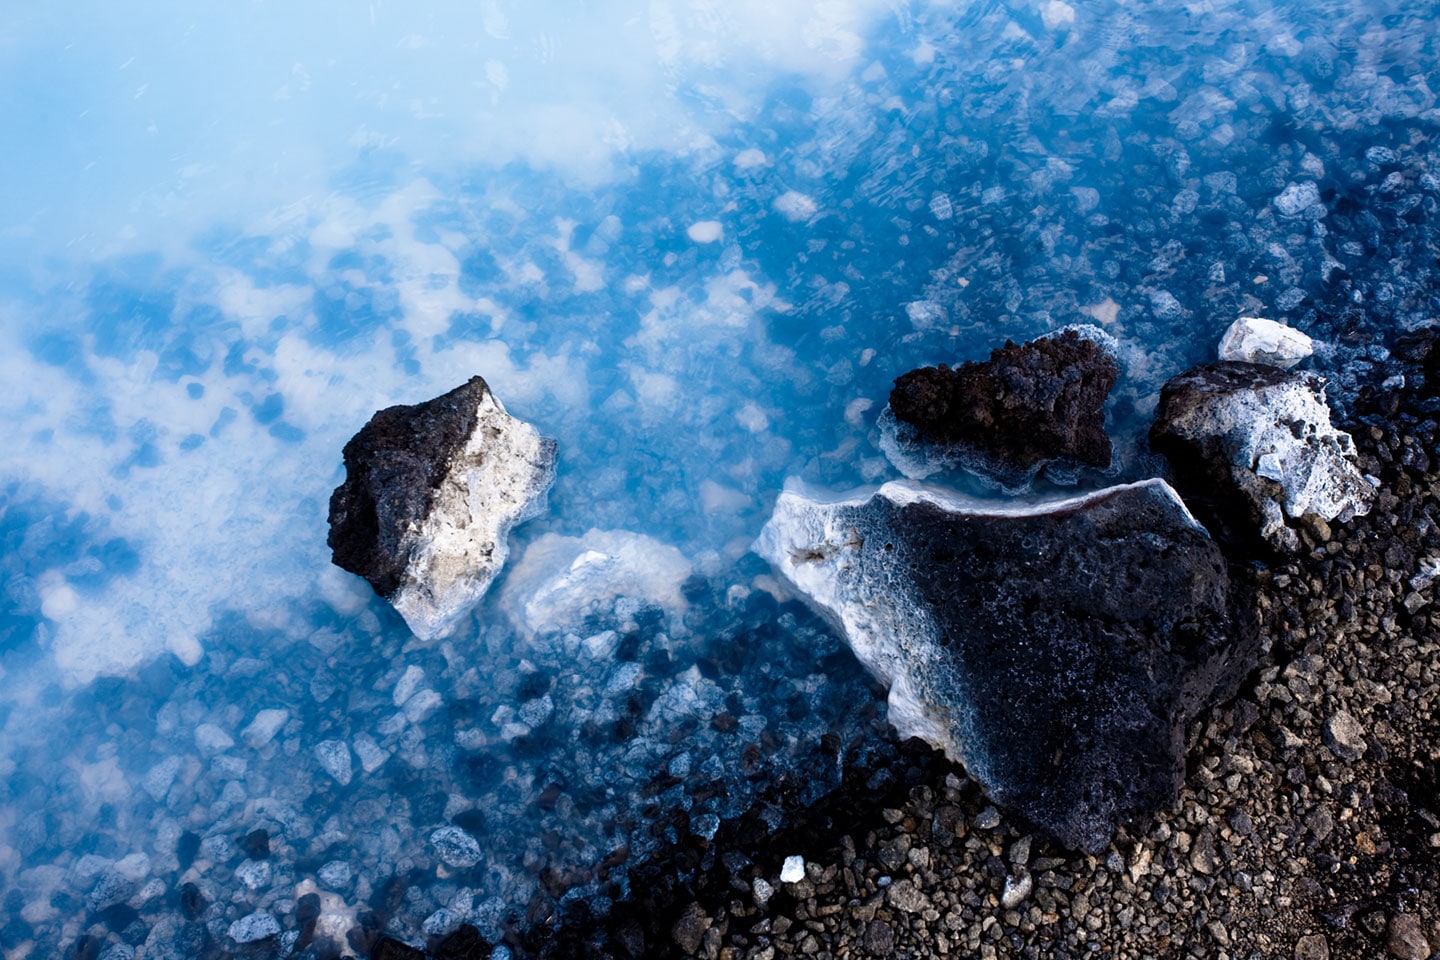 Salt crystals in the blue waters of the blue lagoon